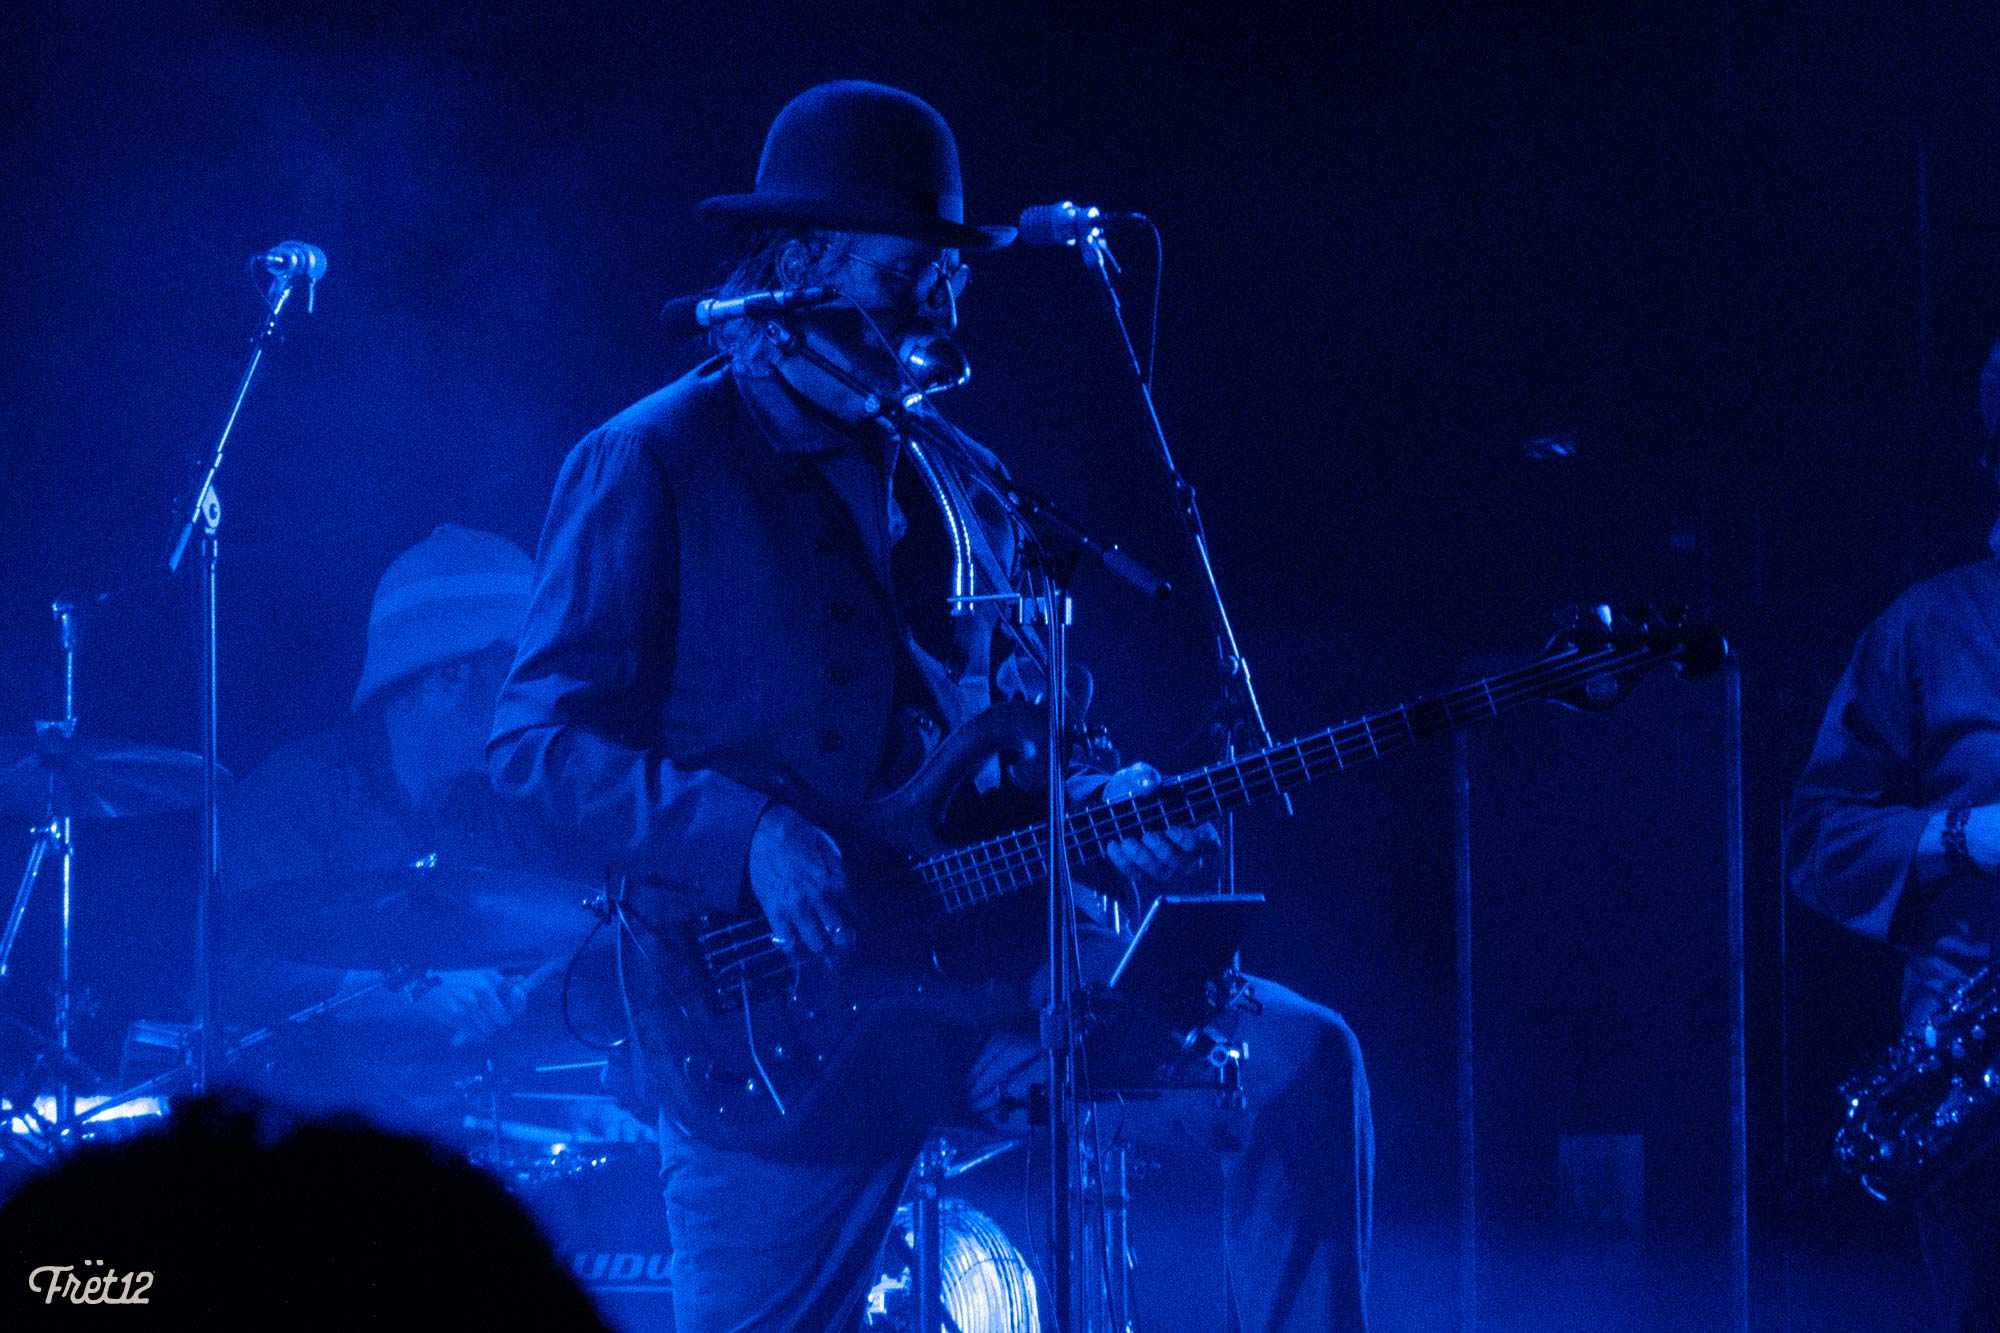 Les Claypool at The Salt Shed - Photos by FRET12